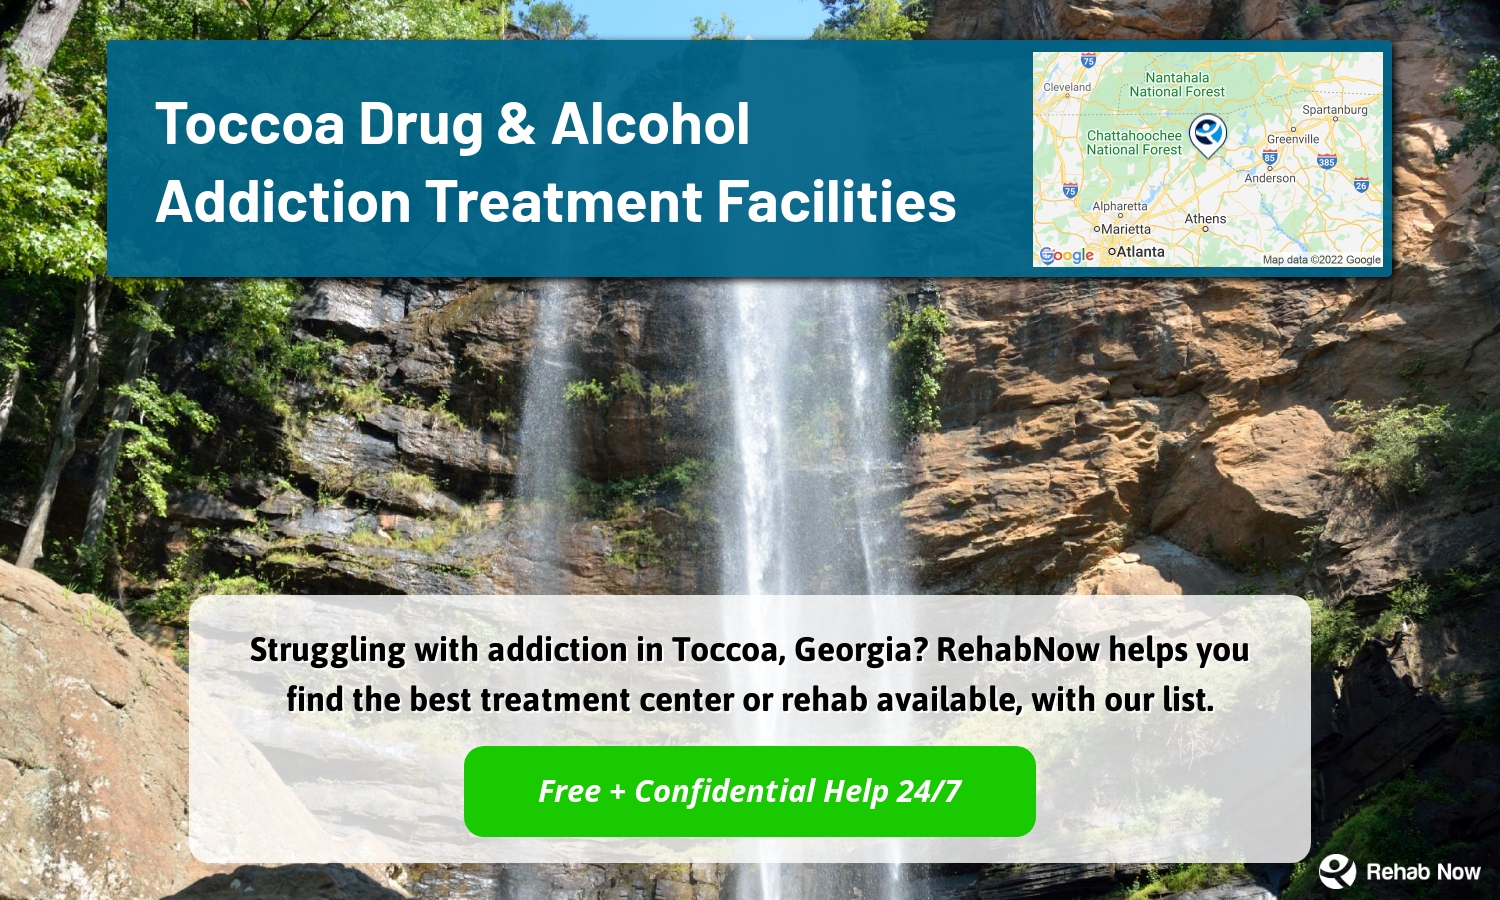 Struggling with addiction in Toccoa, Georgia? RehabNow helps you find the best treatment center or rehab available, with our list.